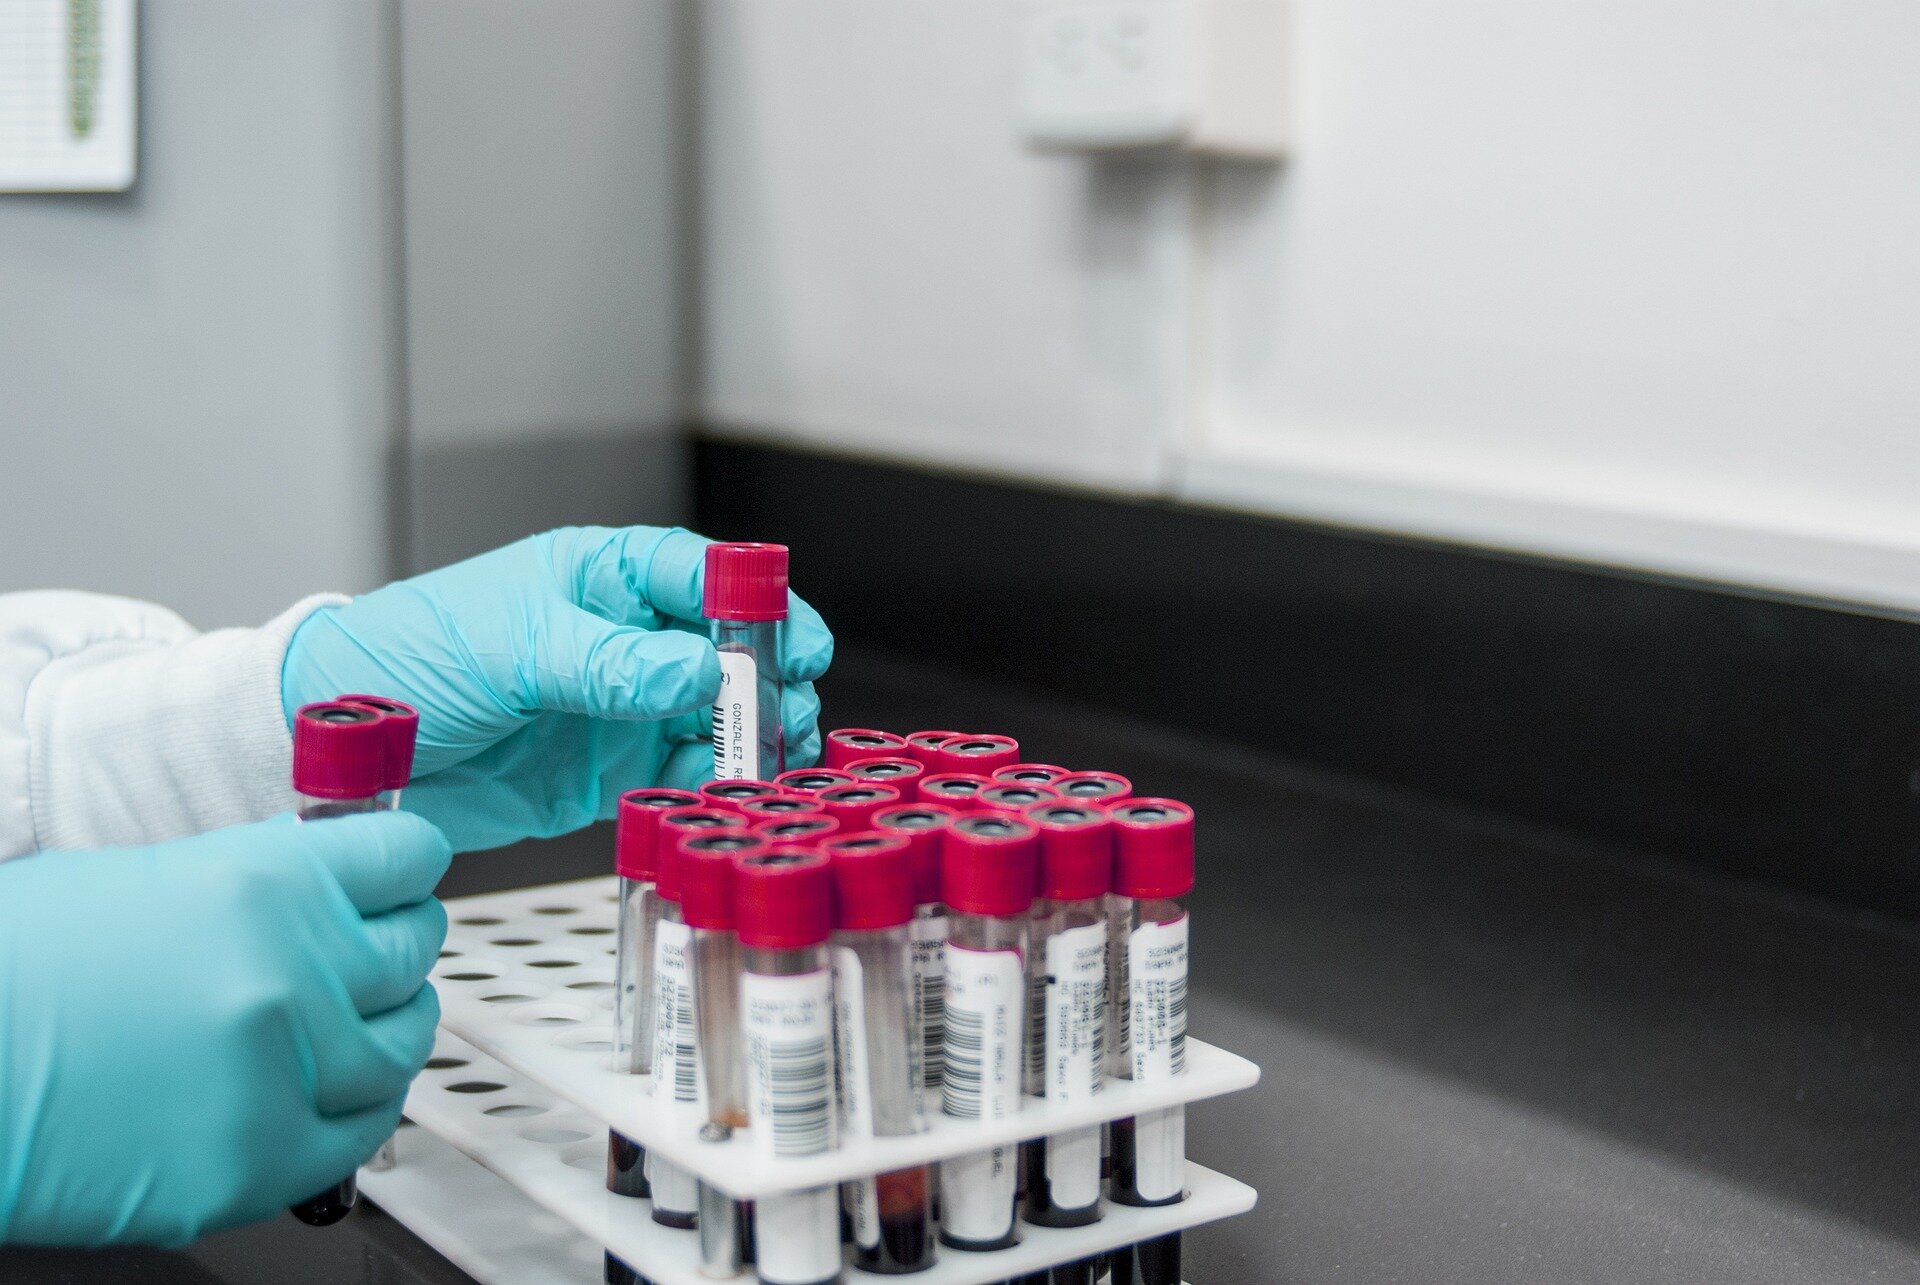 New blood test for stroke combines blood-based biomarkers with a clinical score